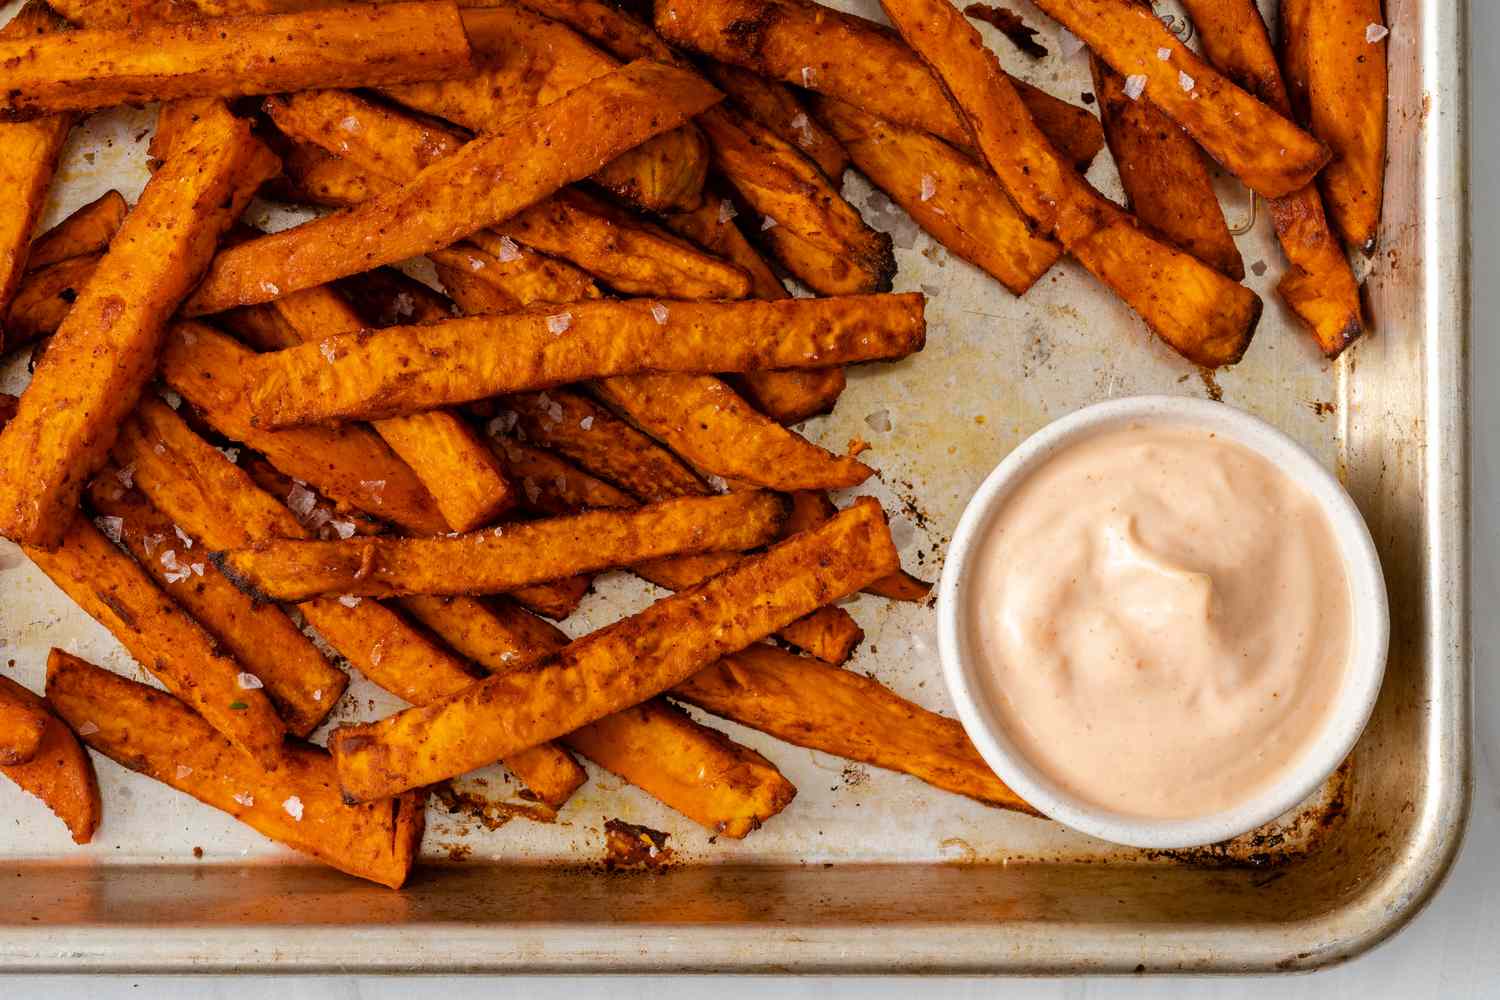 How To Bake Sweet Potato Fries In The Oven Without Oil - Recipes.net